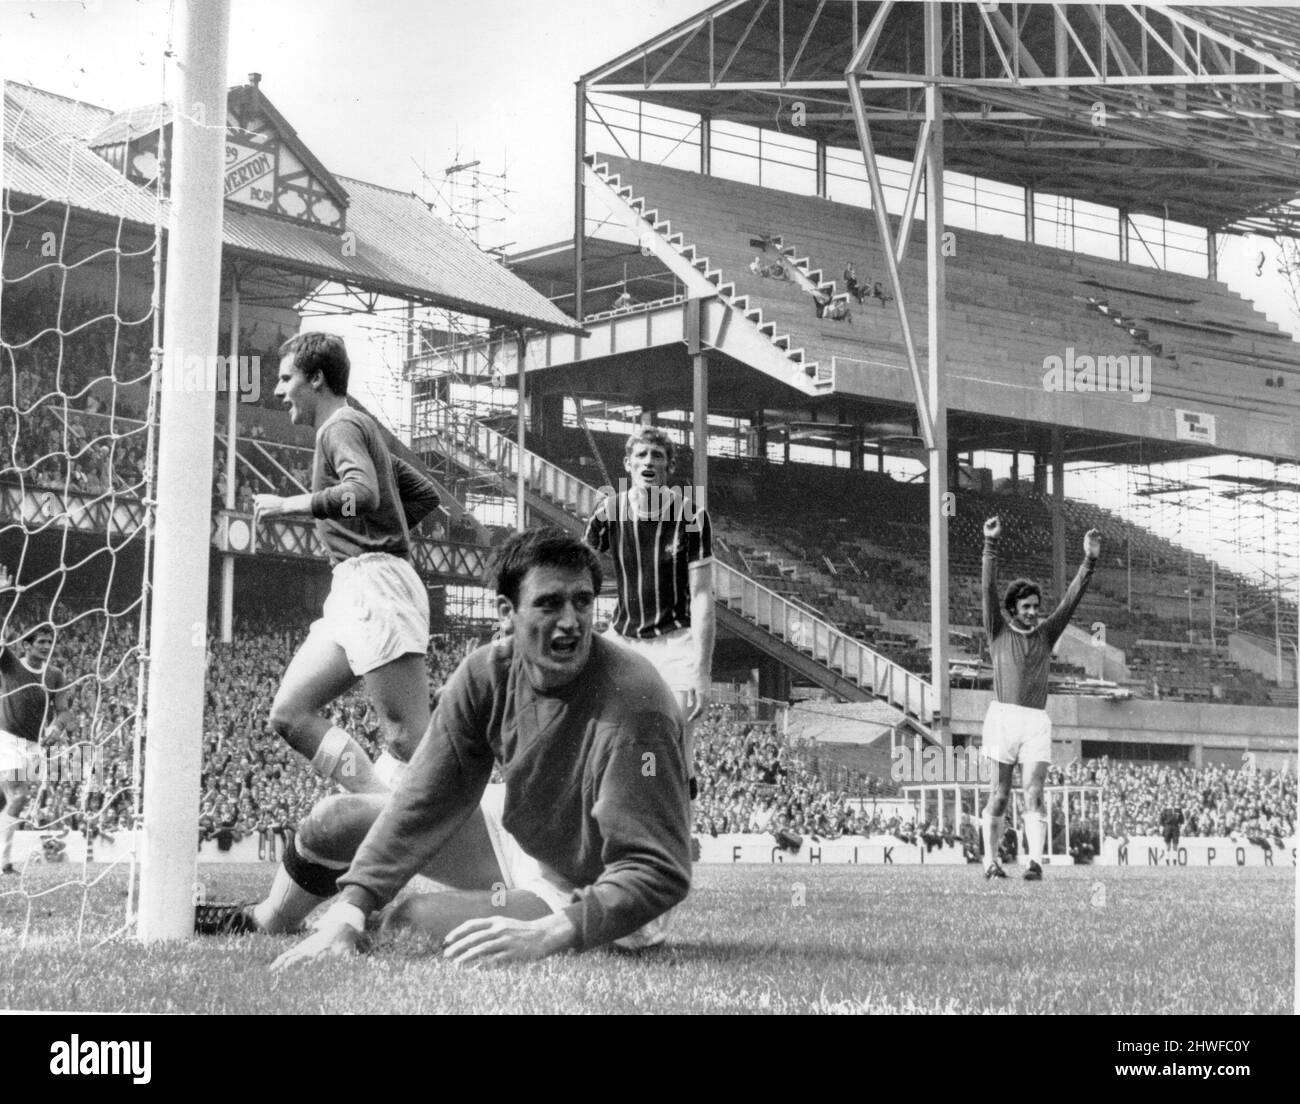 Everton v Crystal Palace league match at Goodison Park August 1969.  Palace keeper John Jackson shouts at his defence as a high cross frm Johnny Morrisey drops into the net for Everton's first goal, John Hurst and Joe Royle celebrate.  Final score: Everton 2-1 Crystal Palace Stock Photo